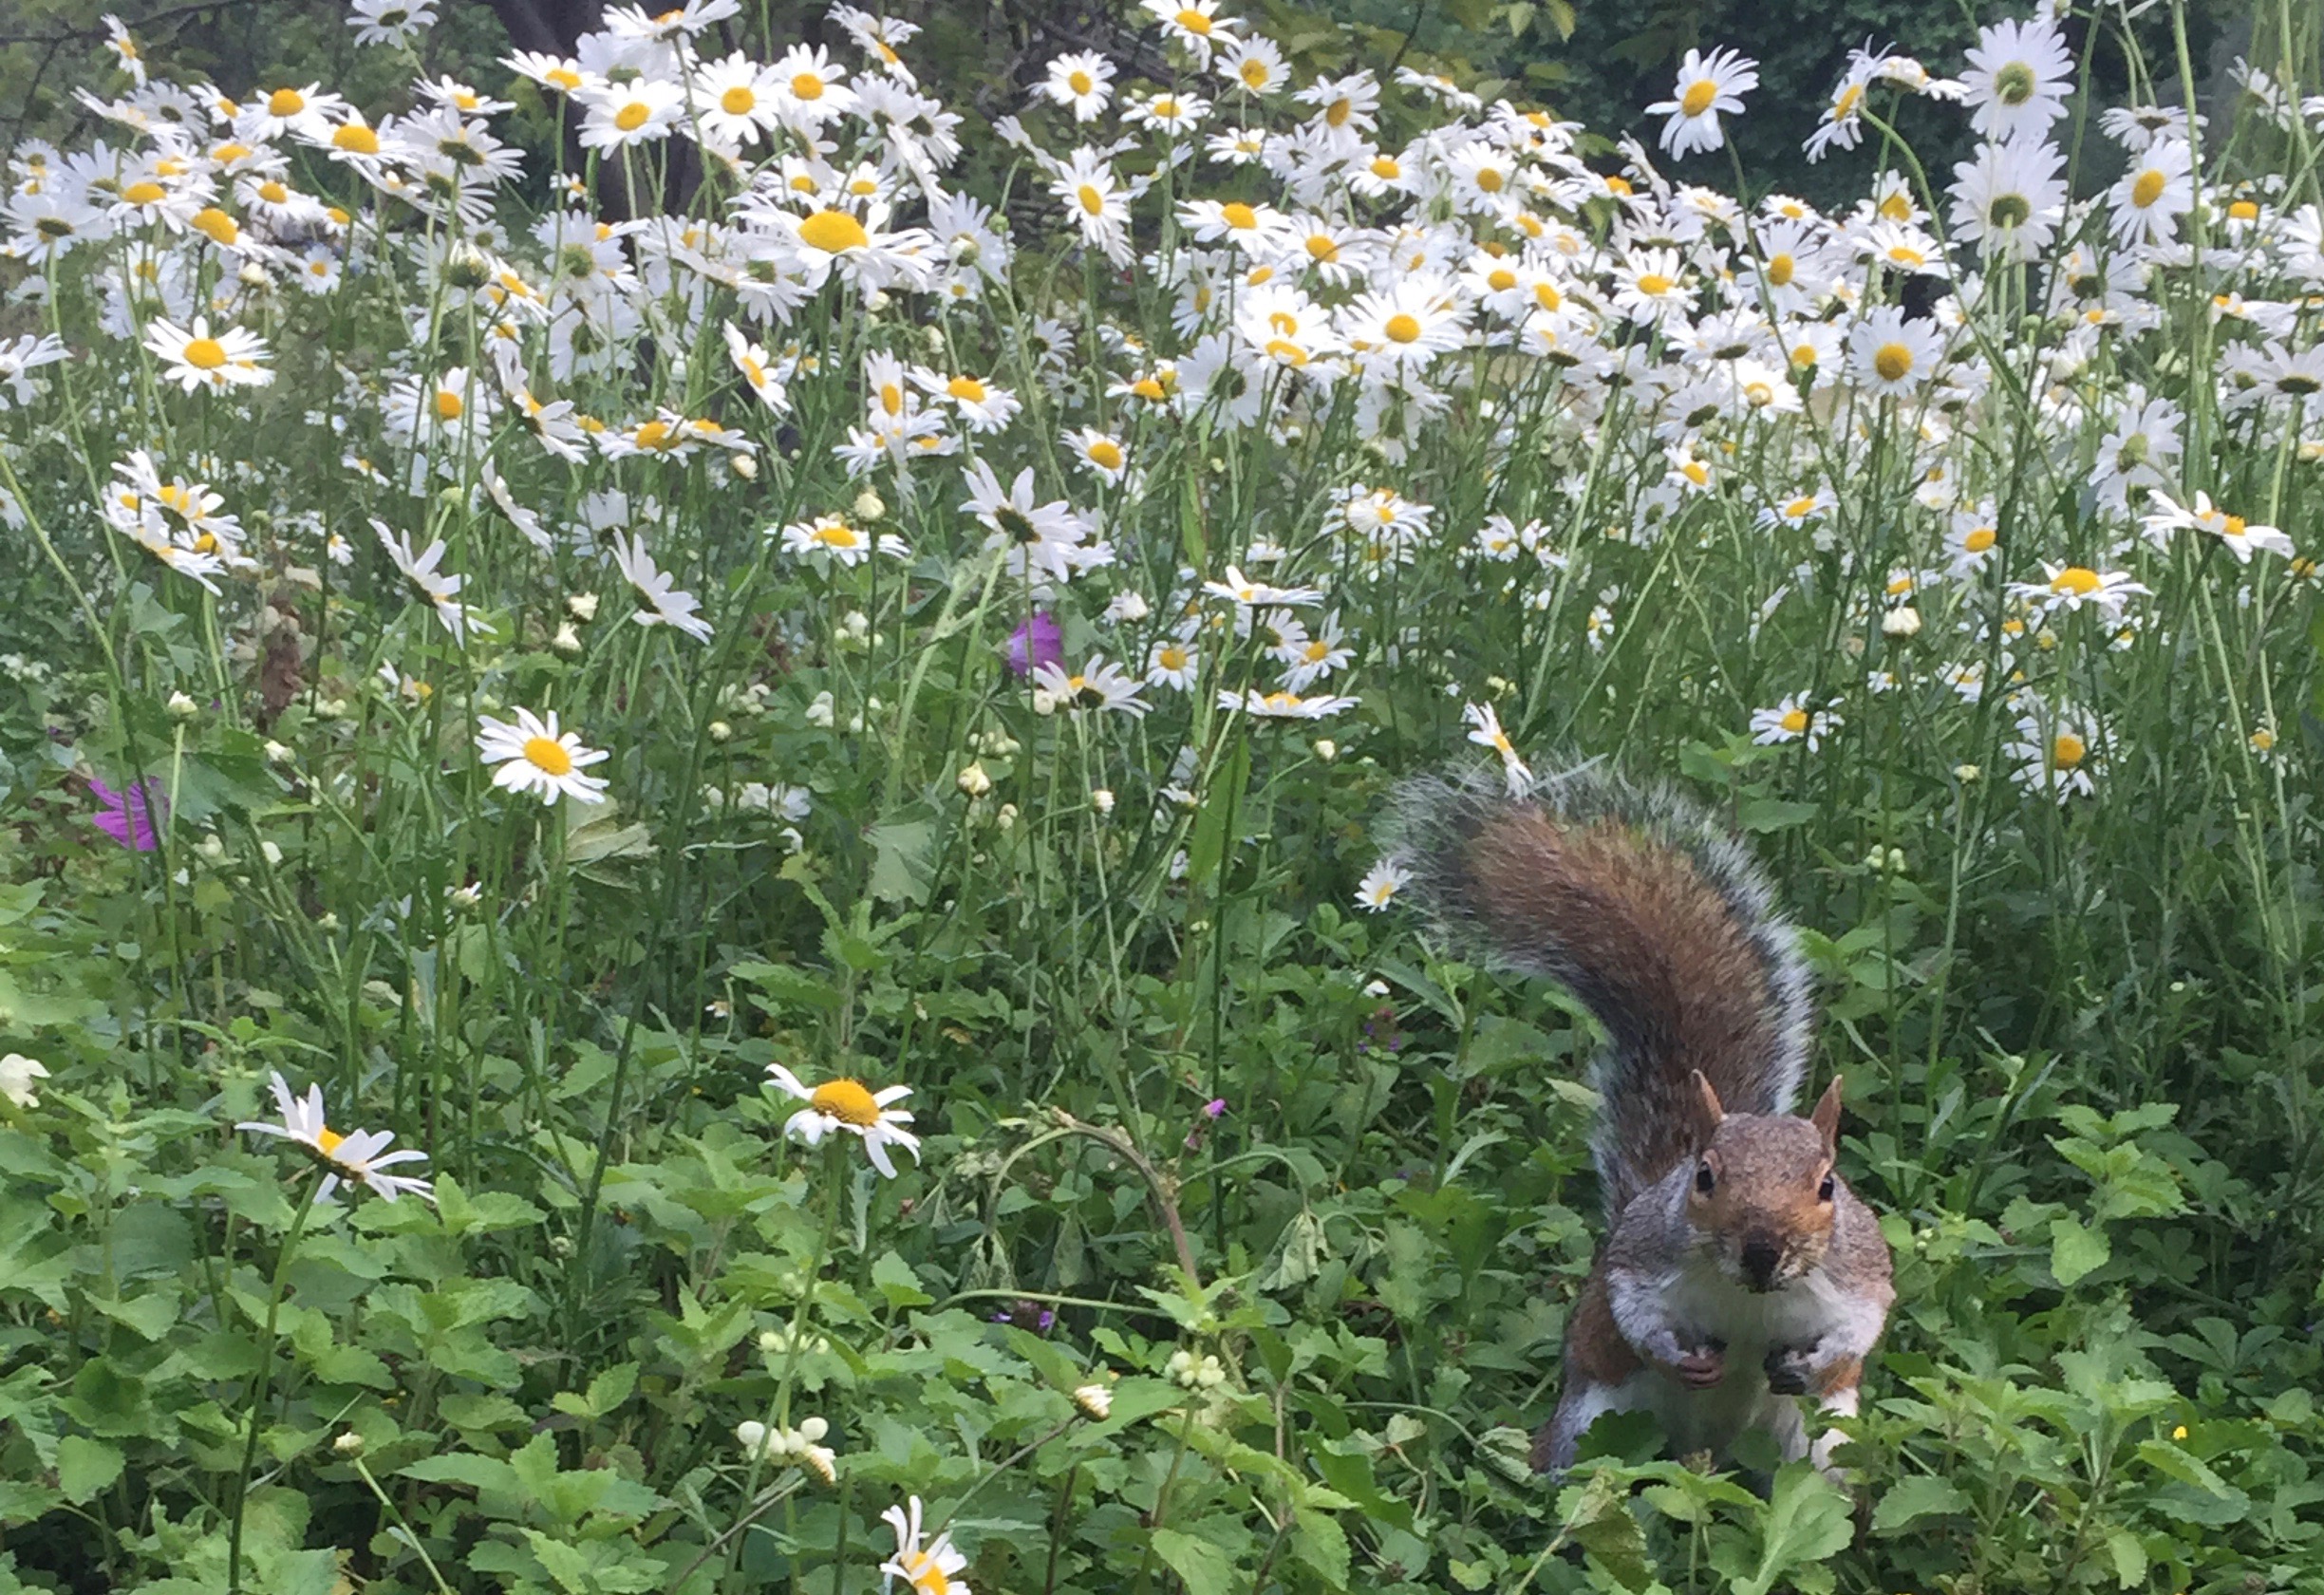 A squirrel in a rather confrontational pose, facing the camera with its tail over its head, standing in a field of daisies